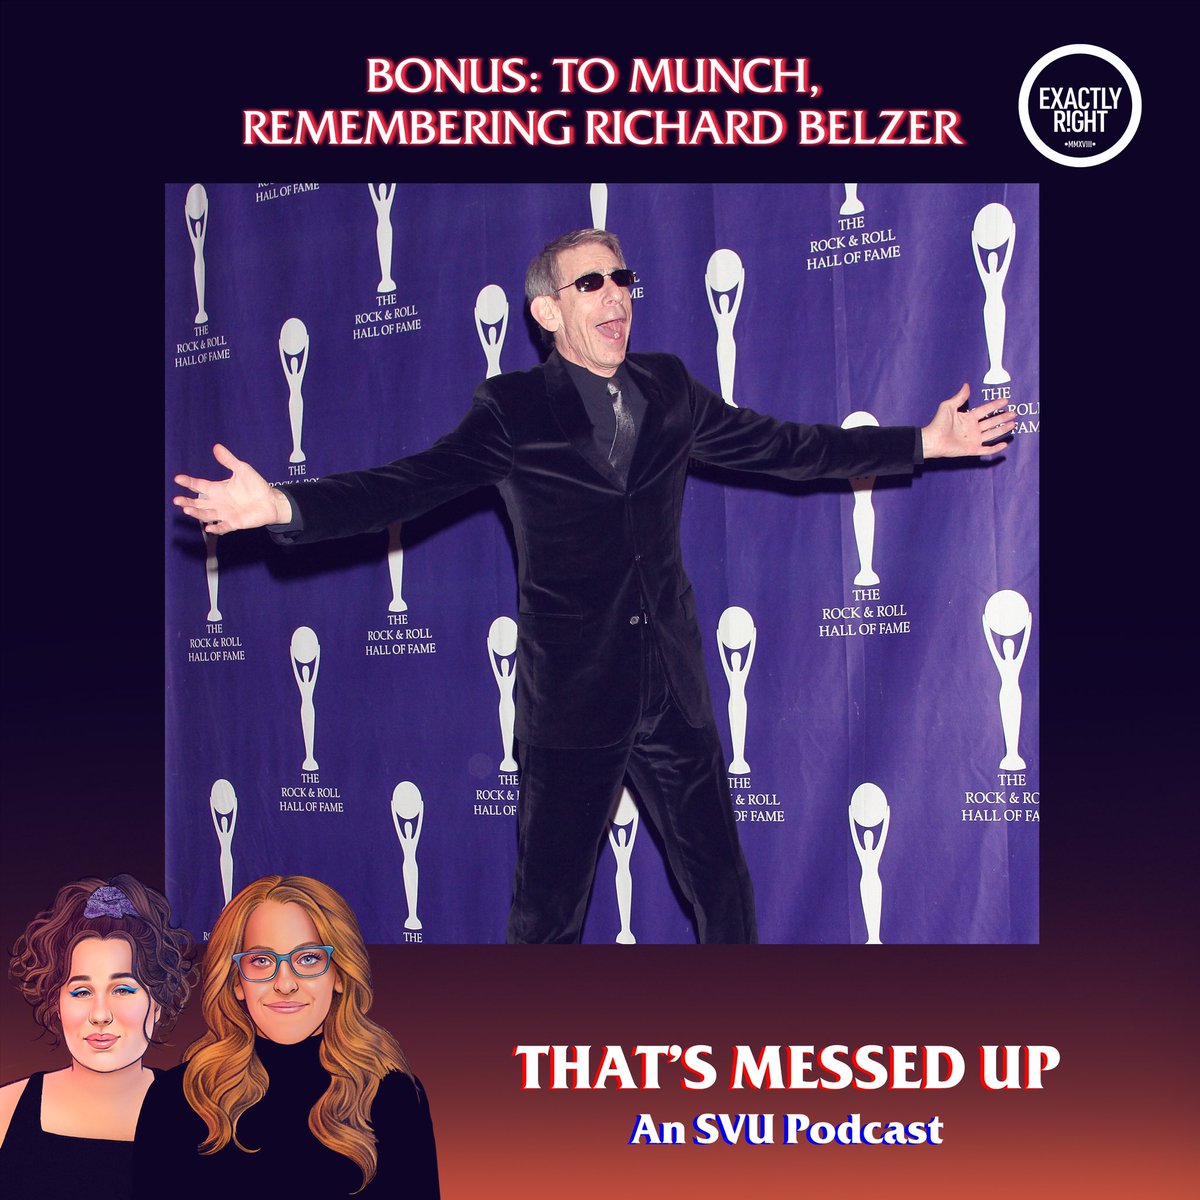 BONUS EPISODE - To Munch, Remembering Richard Belzer 

We’ve all been so affected by the passing of icon, Richard Belzer, so we recorded this little baby ep, a Munchkin, if you will. 
#riprichardbelzer 

LISTEN HERE ➡️
podcasts.apple.com/us/podcast/tha…